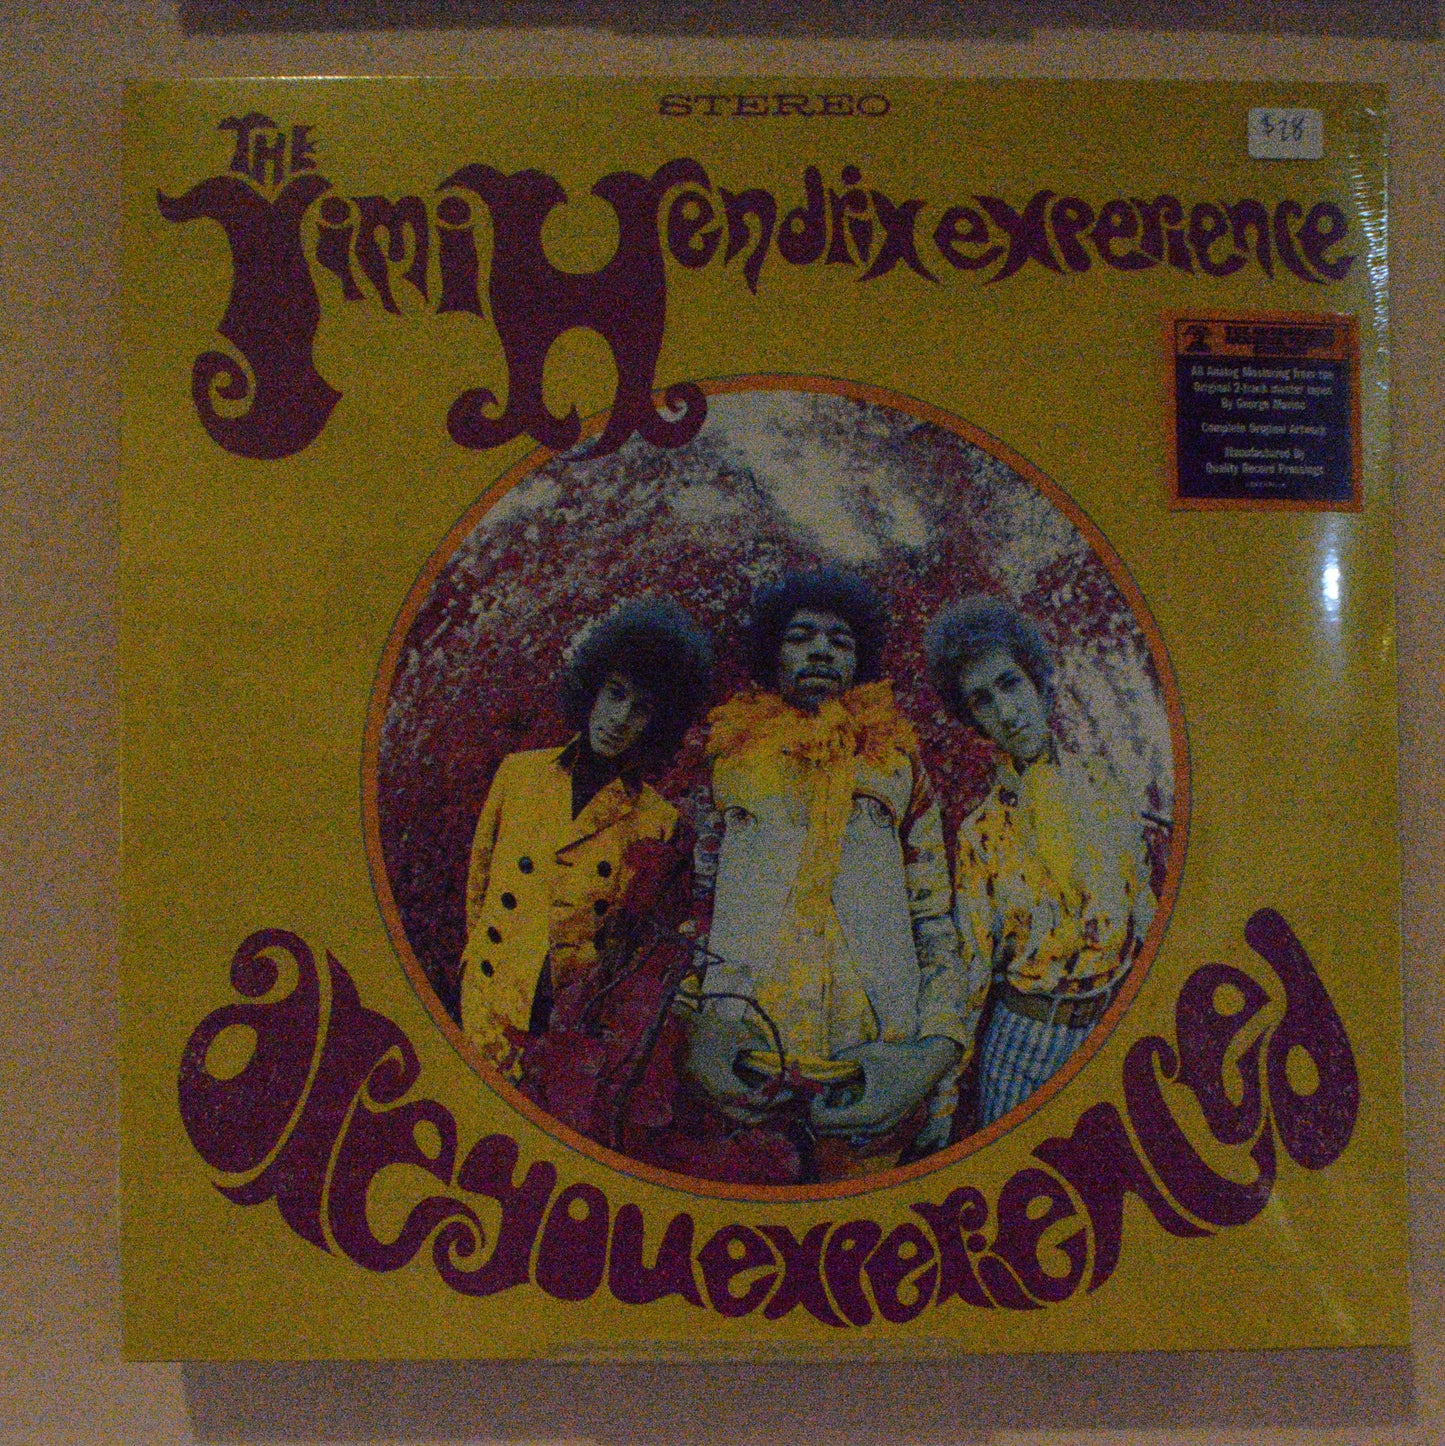 The Jimi Hendrix Experience - Are You Experienced LP